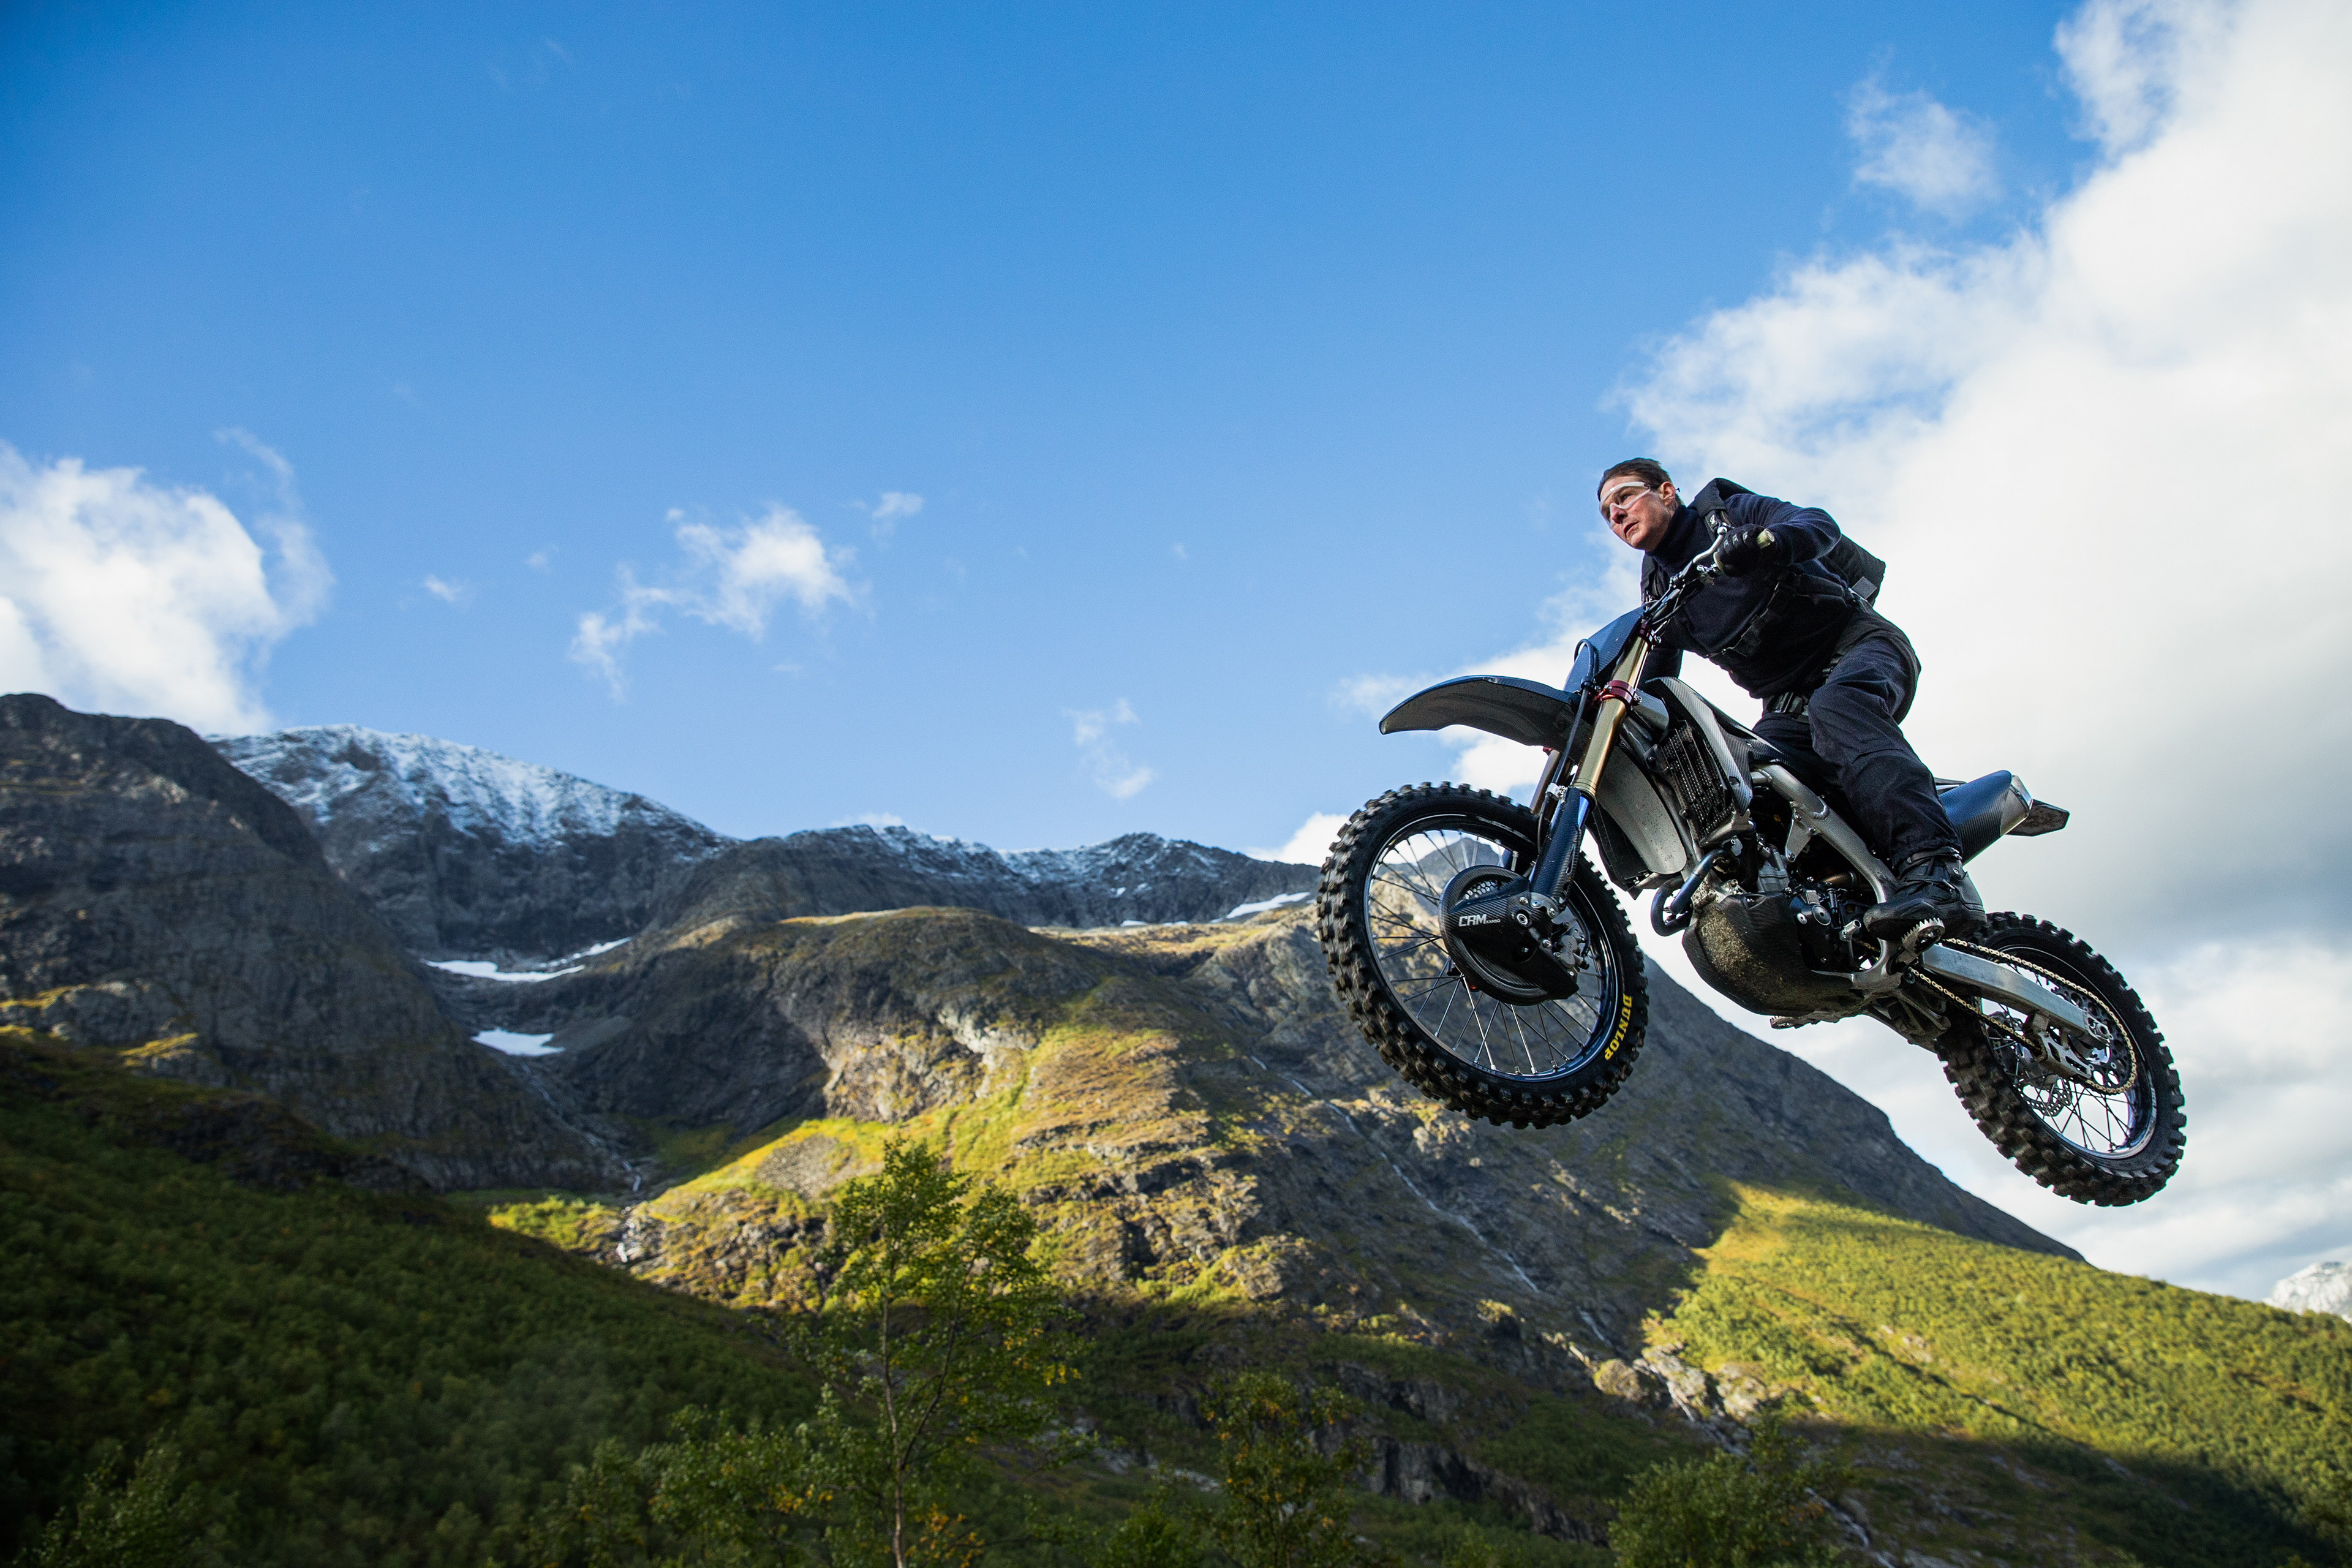 Tom Cruise as Ethan Hunt rides a motorcycle mid-jump off a mountain with the blue sky filling the top half of the screen in a scene from Mission: Impossible - Dead Reckoning Part 1